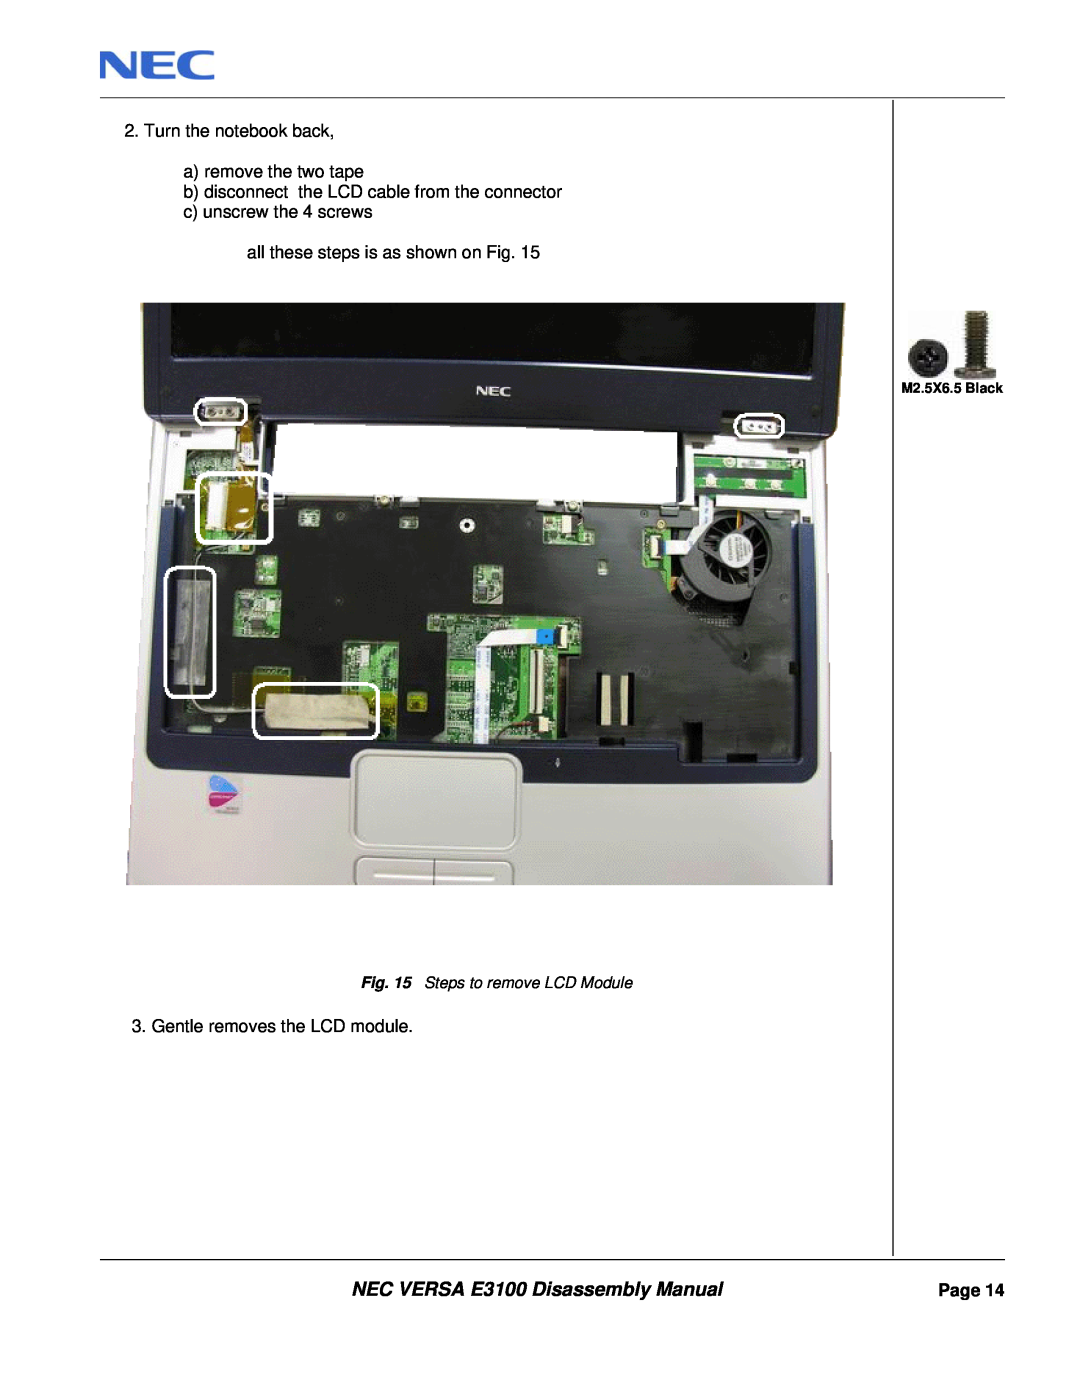 NEC manual NEC VERSA E3100 Disassembly Manual, Turn the notebook back aremove the two tape, cunscrew the 4 screws, Page 